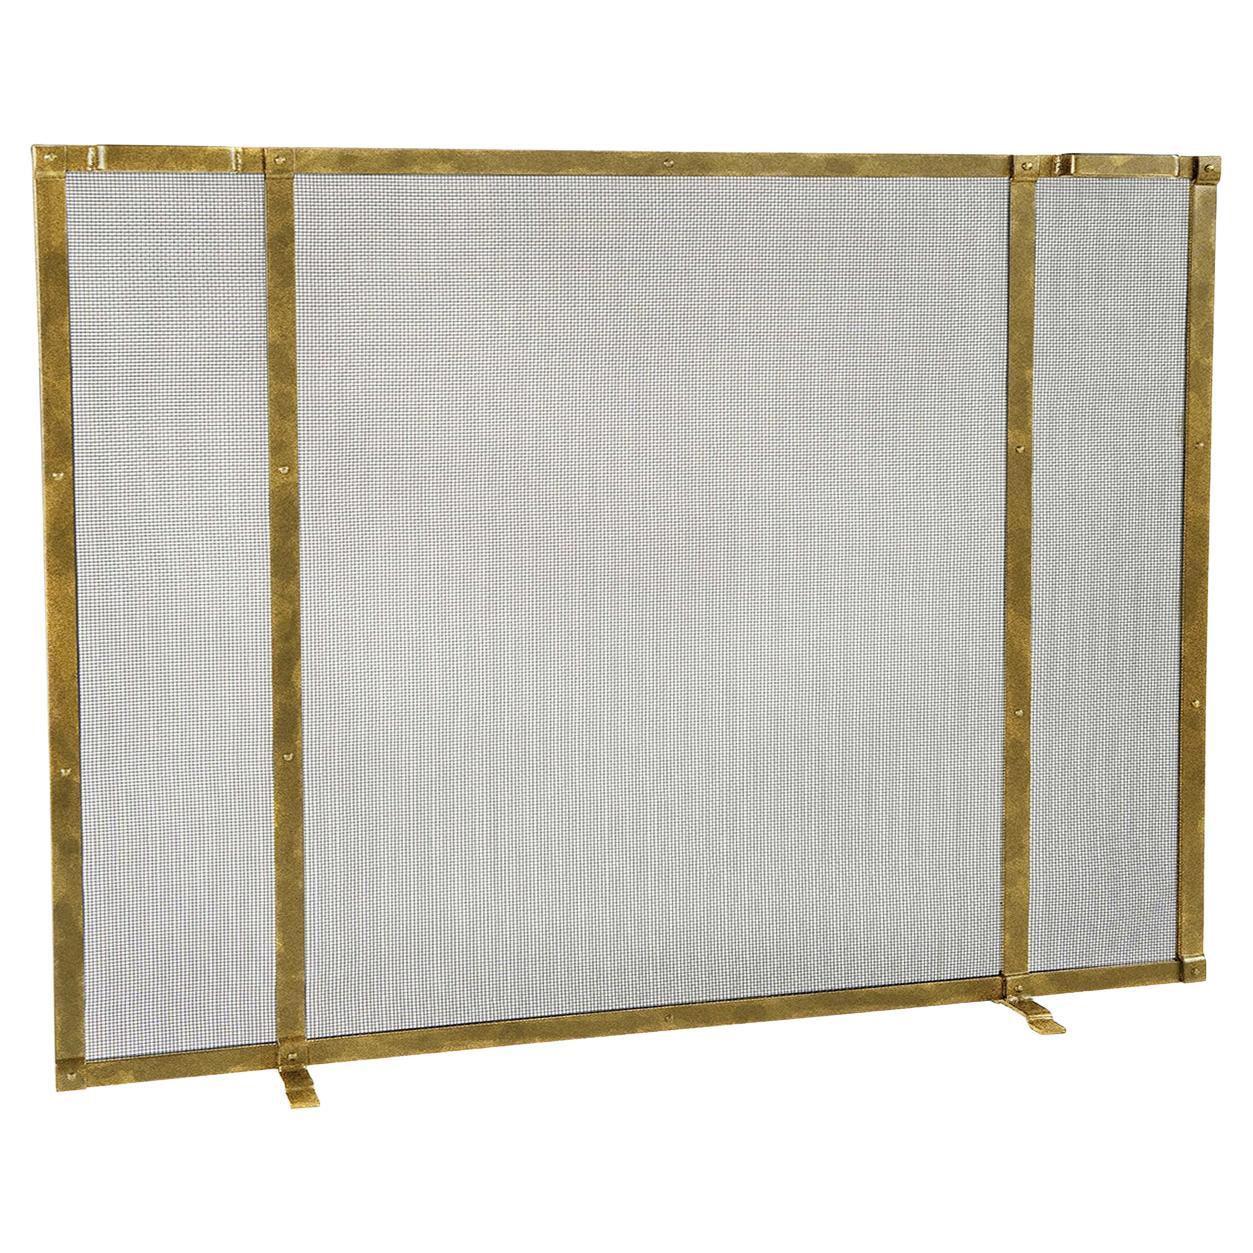 Gunnison Fireplace Screen in a Aged Gold Finish